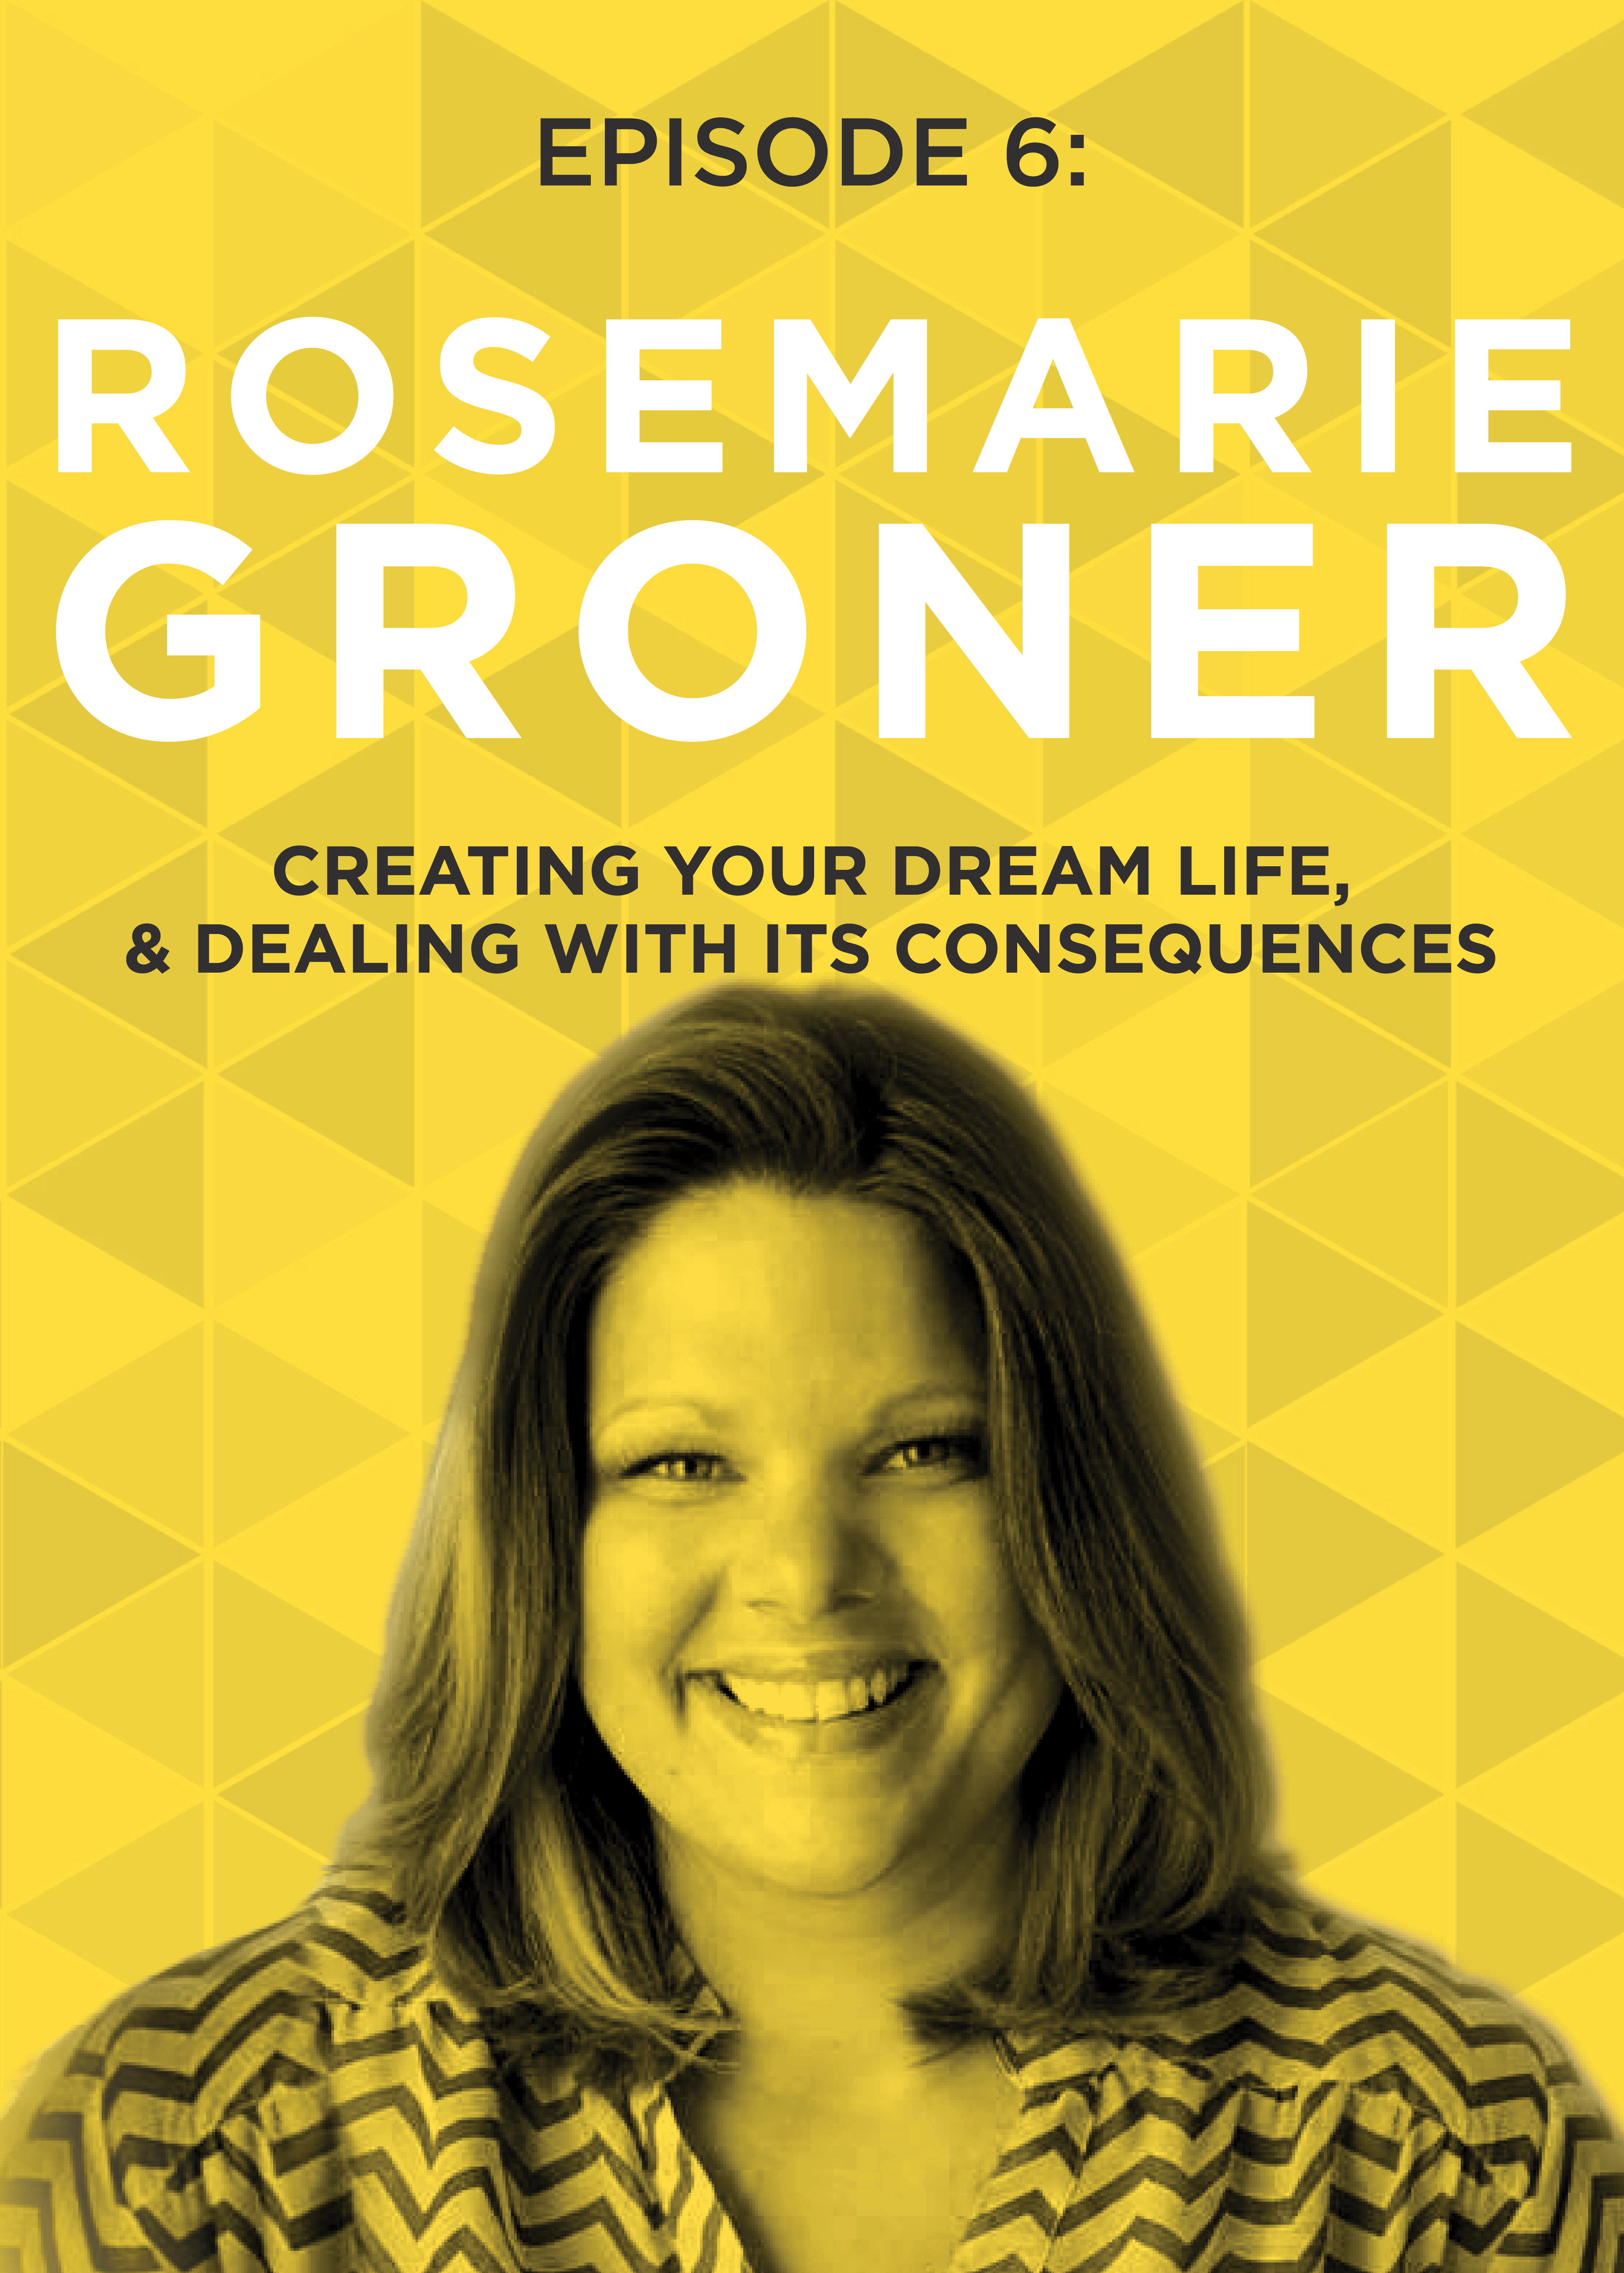 EP 6: Creating Your Dream Life, & Dealing With its Consequences with Rosemarie Groner